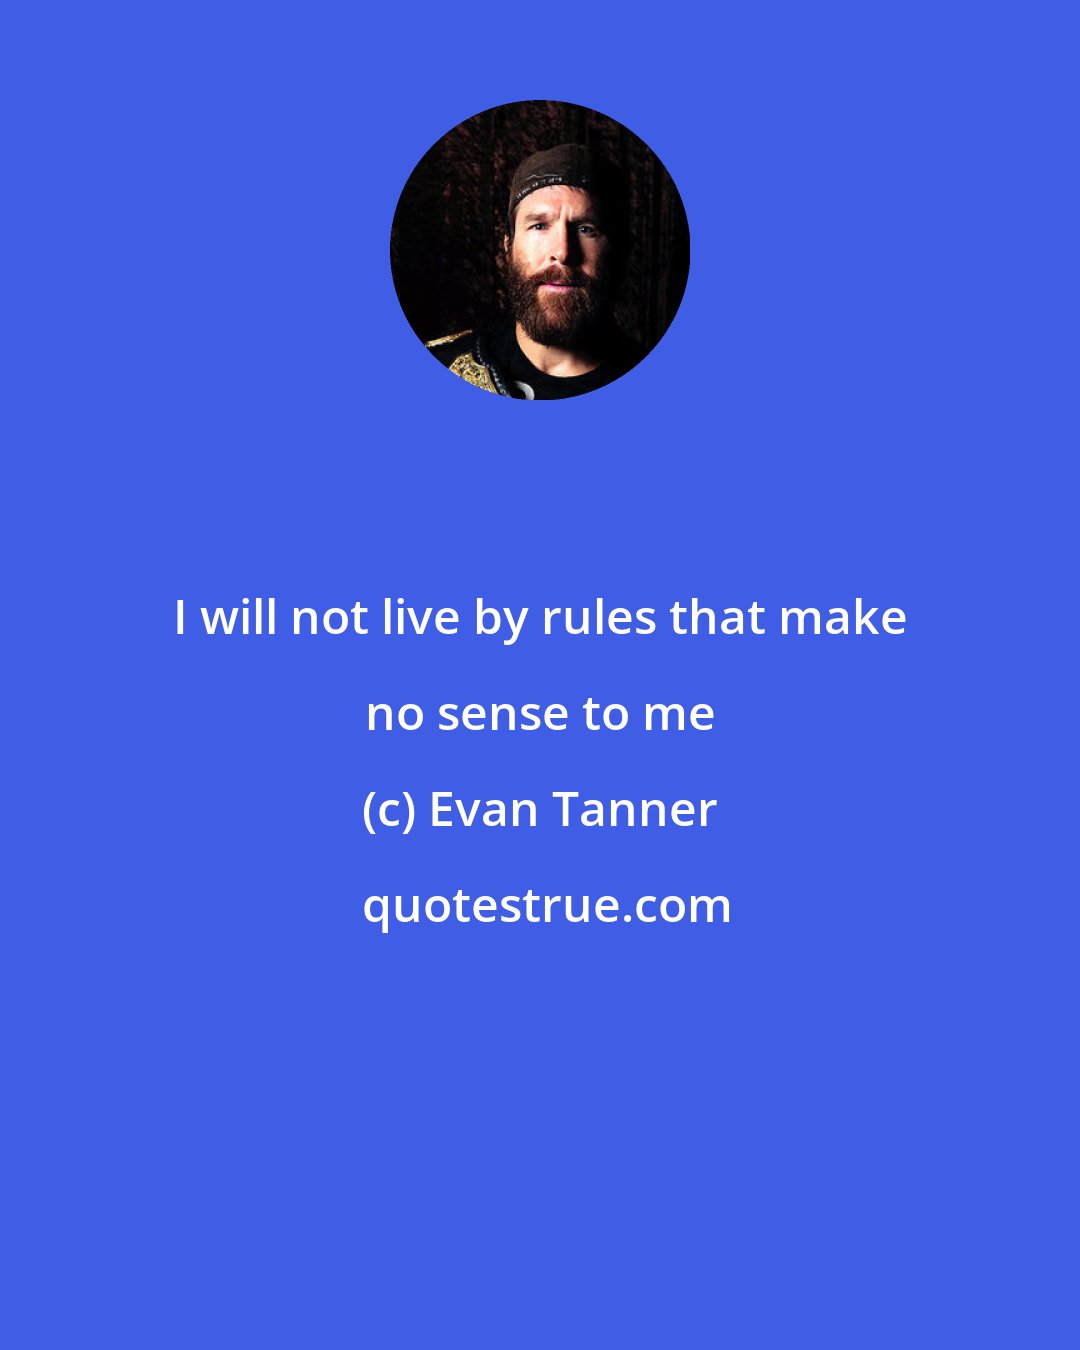 Evan Tanner: I will not live by rules that make no sense to me